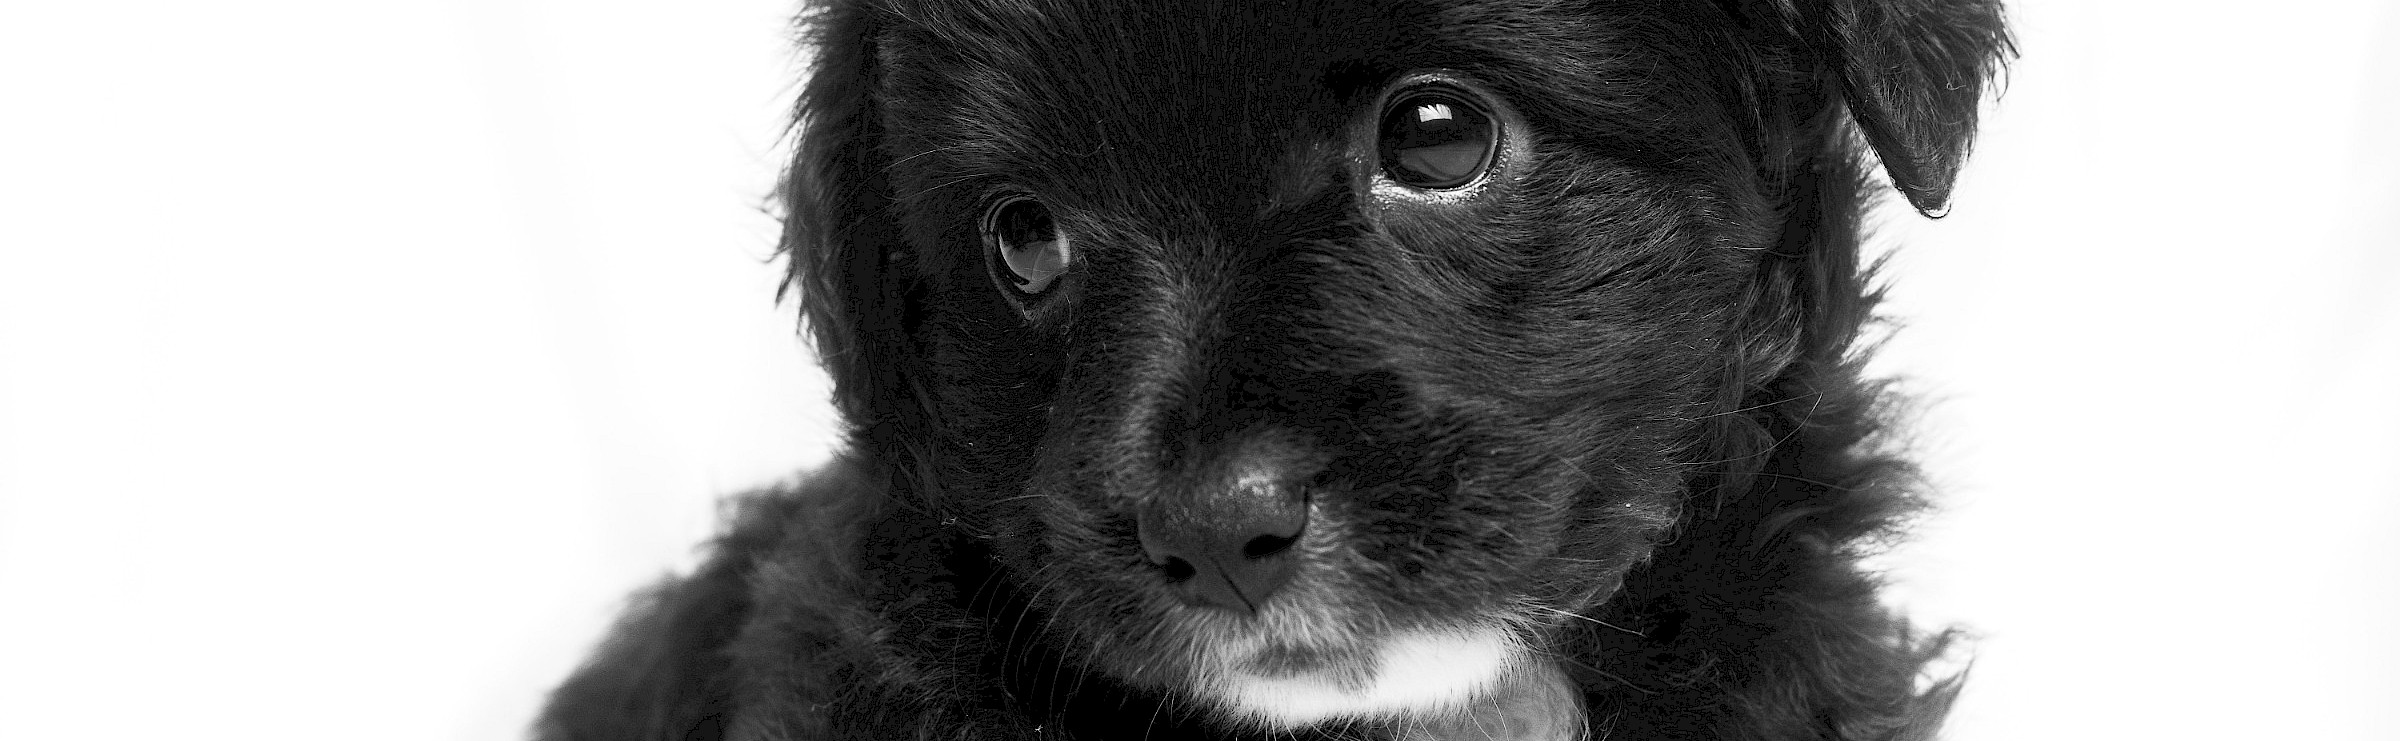 Cute little black puppy looking up